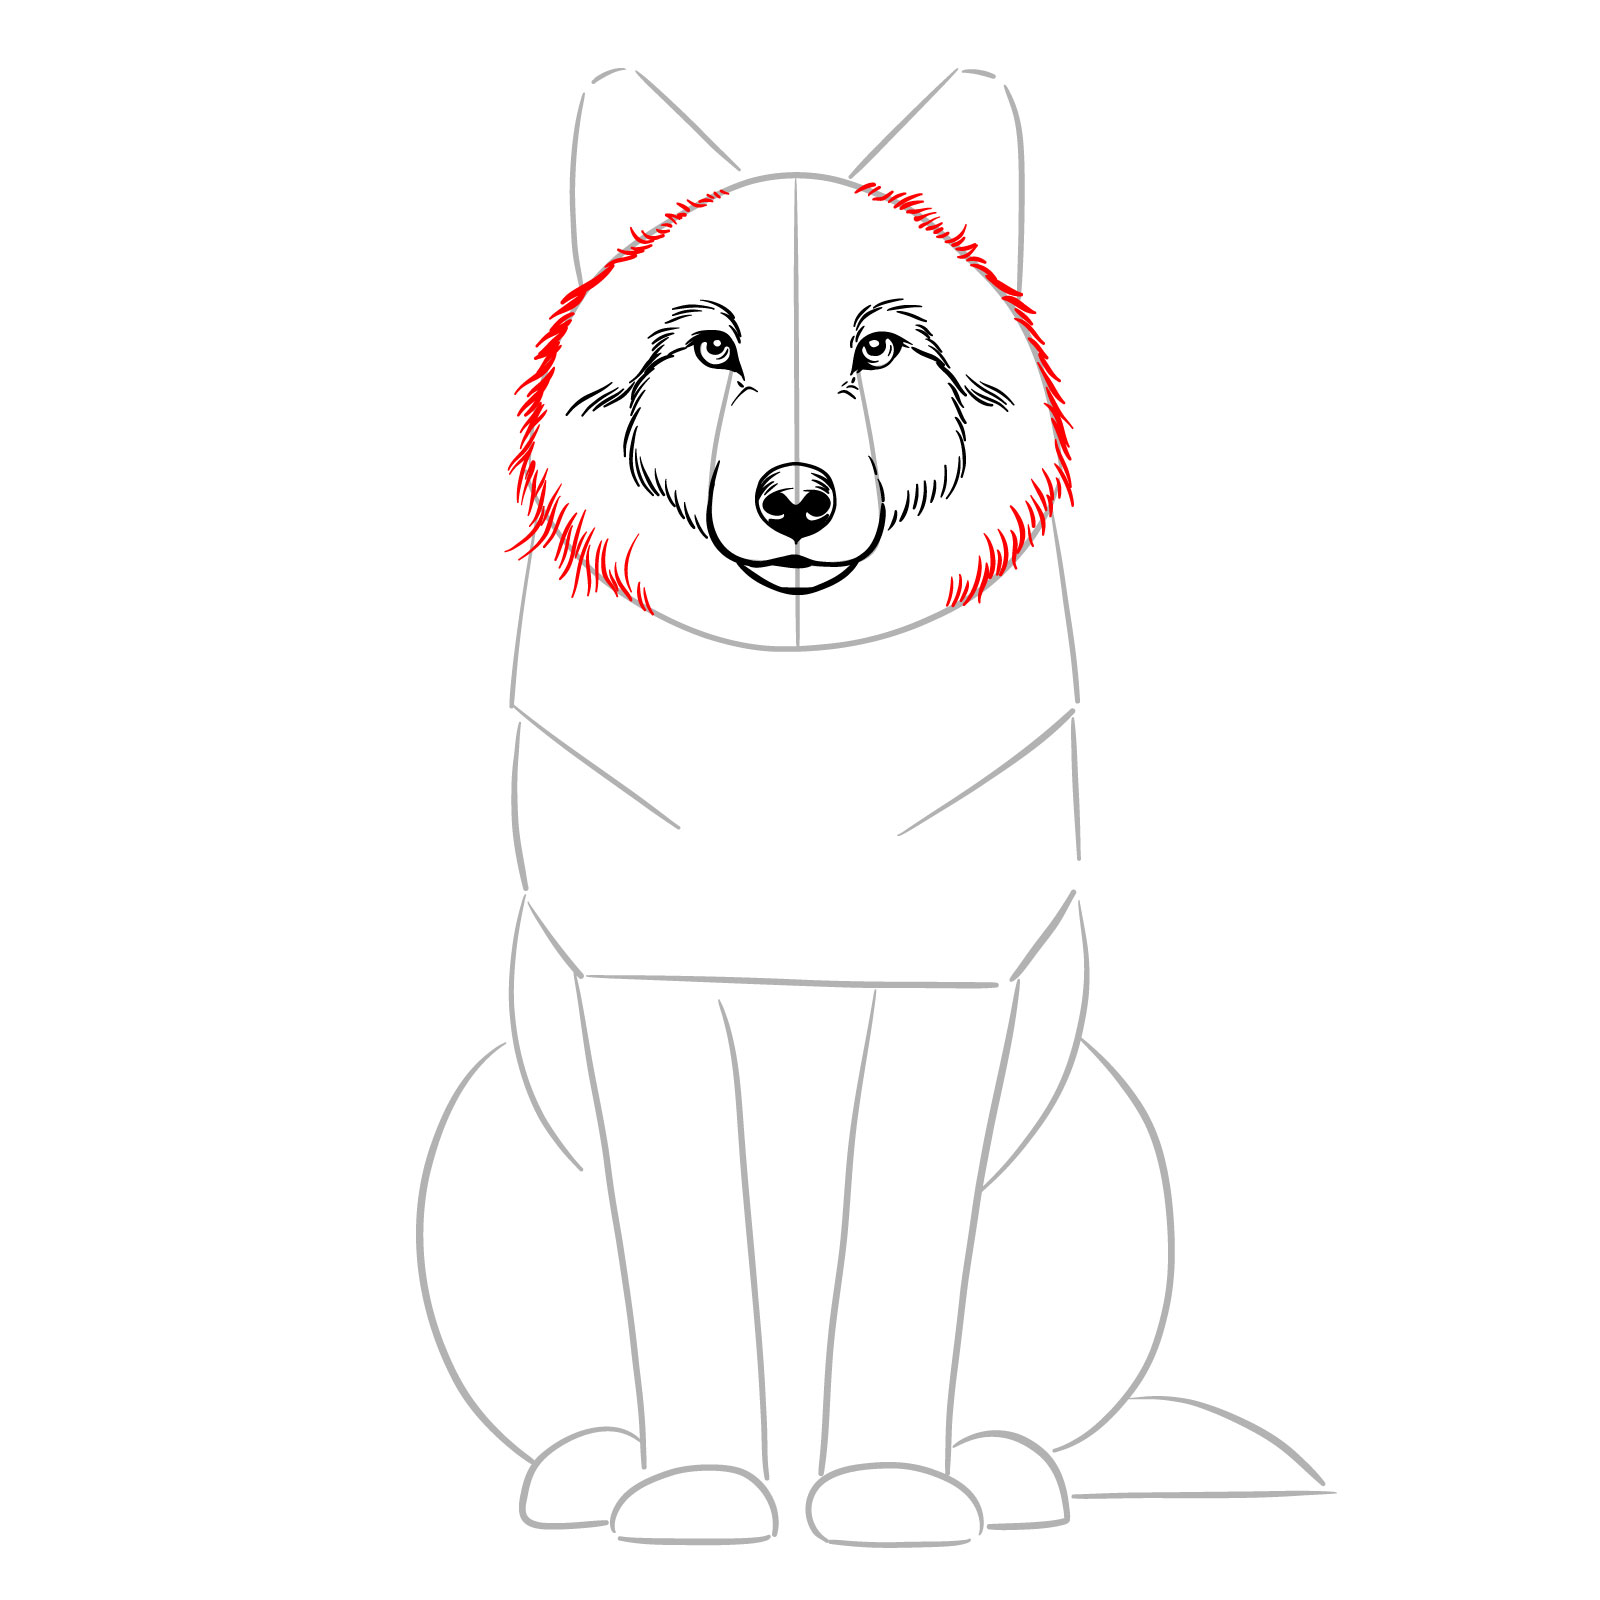 Creating fur texture around the wolf's head in a sitting wolf drawing guide - step 07